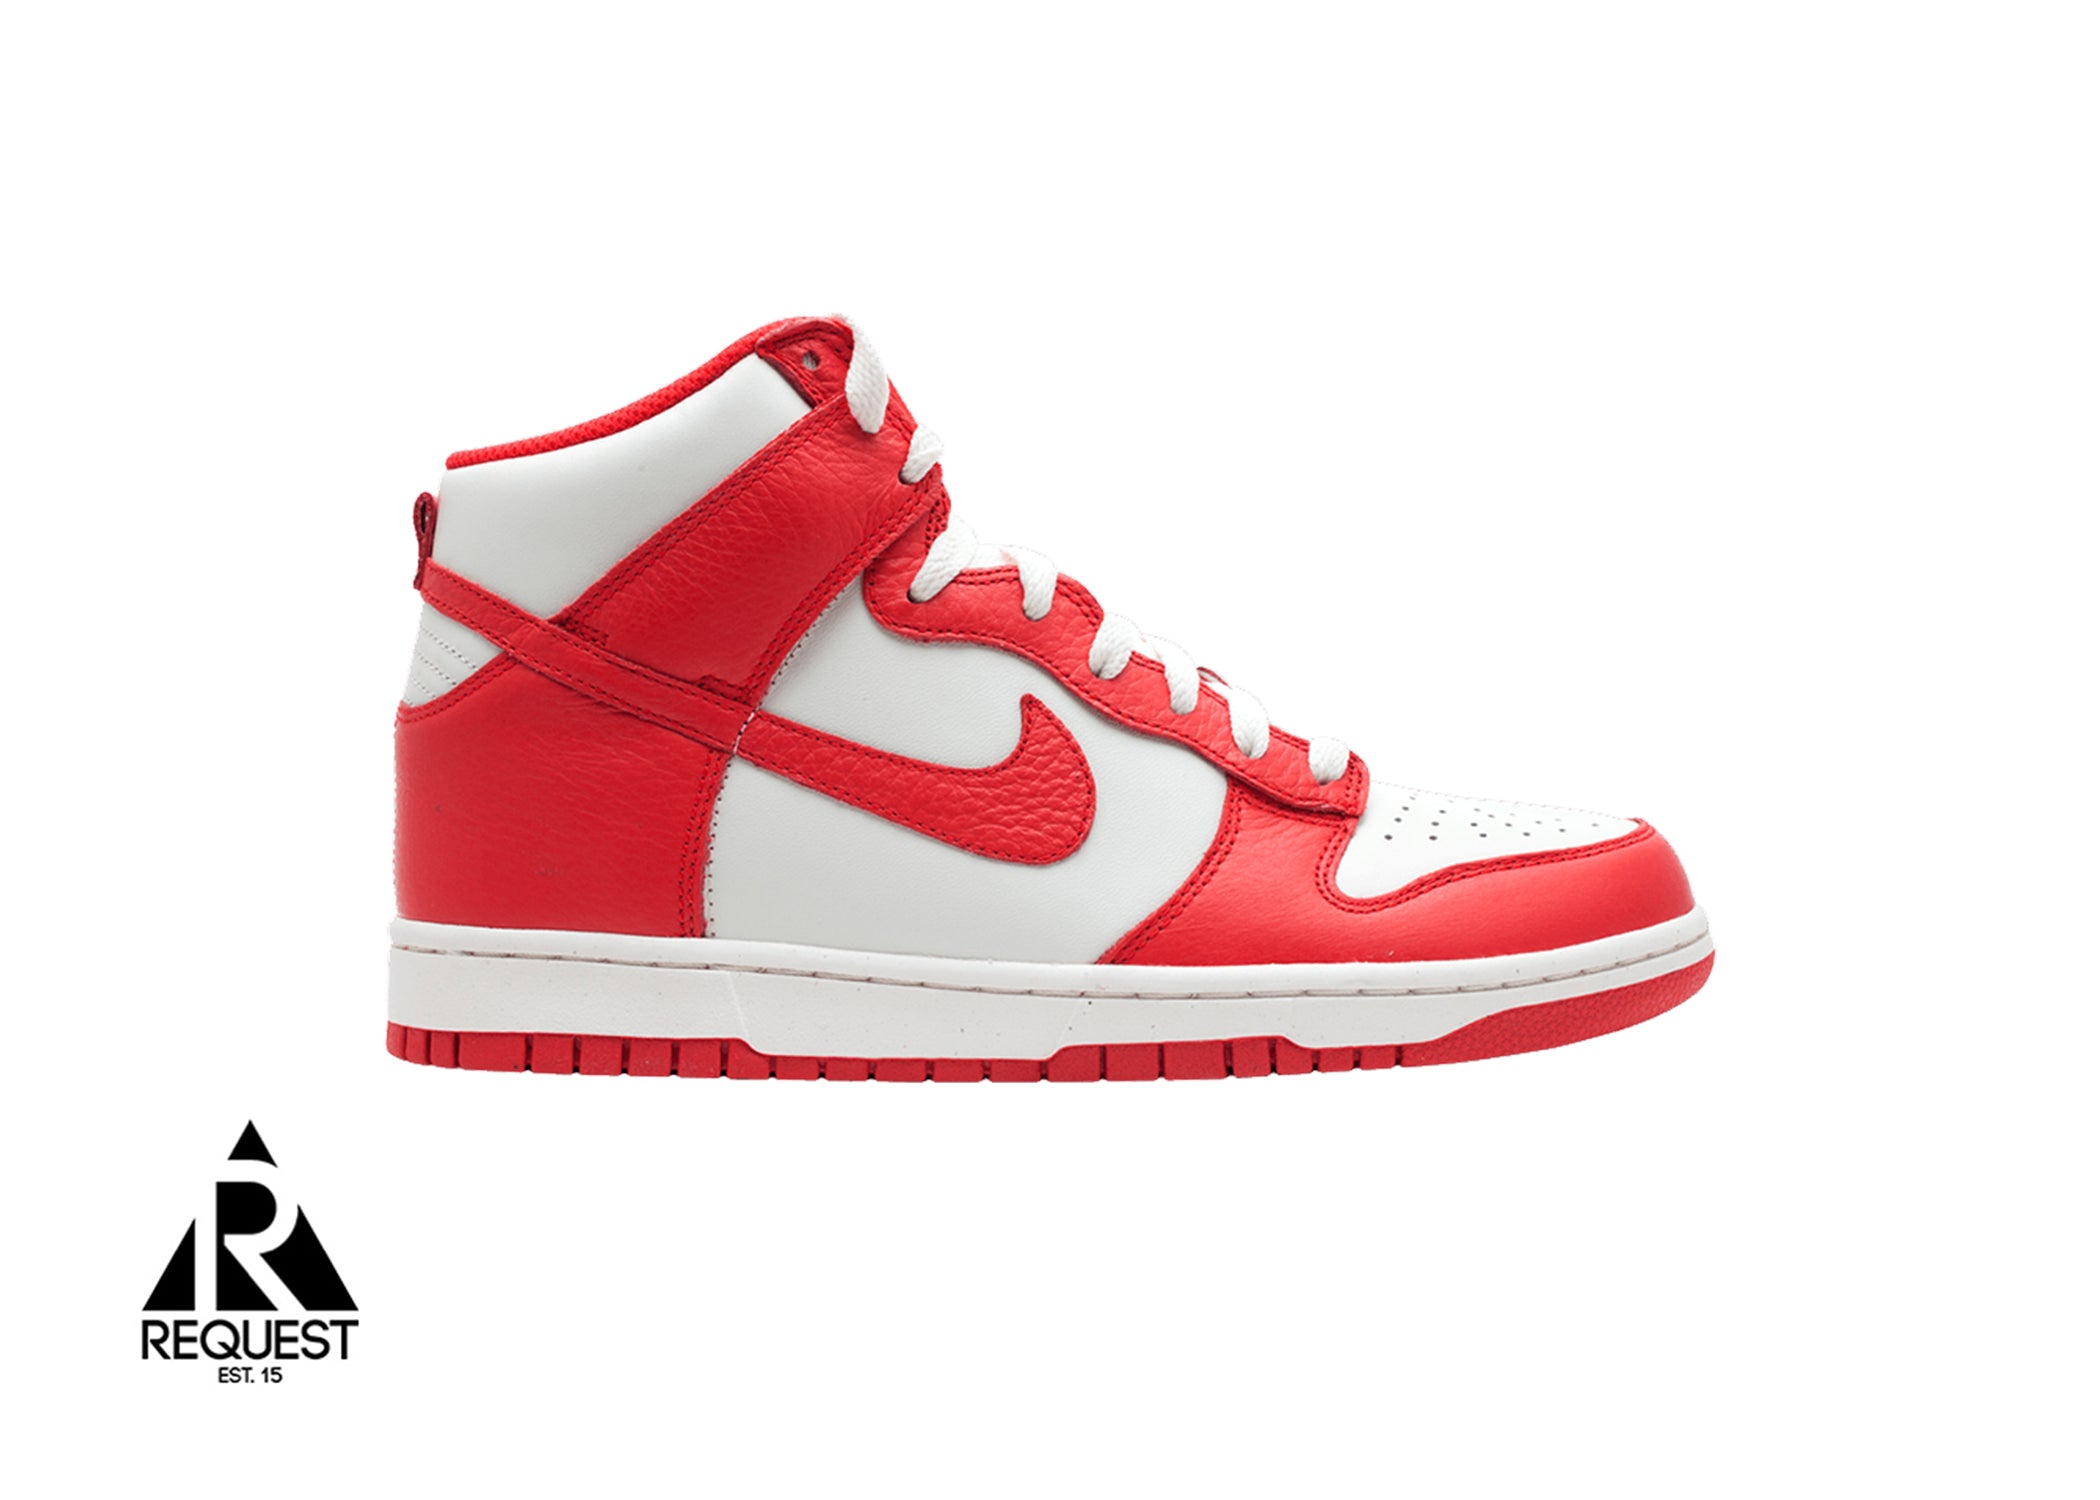 Nike Dunk High College Pack “Sail Action Red”